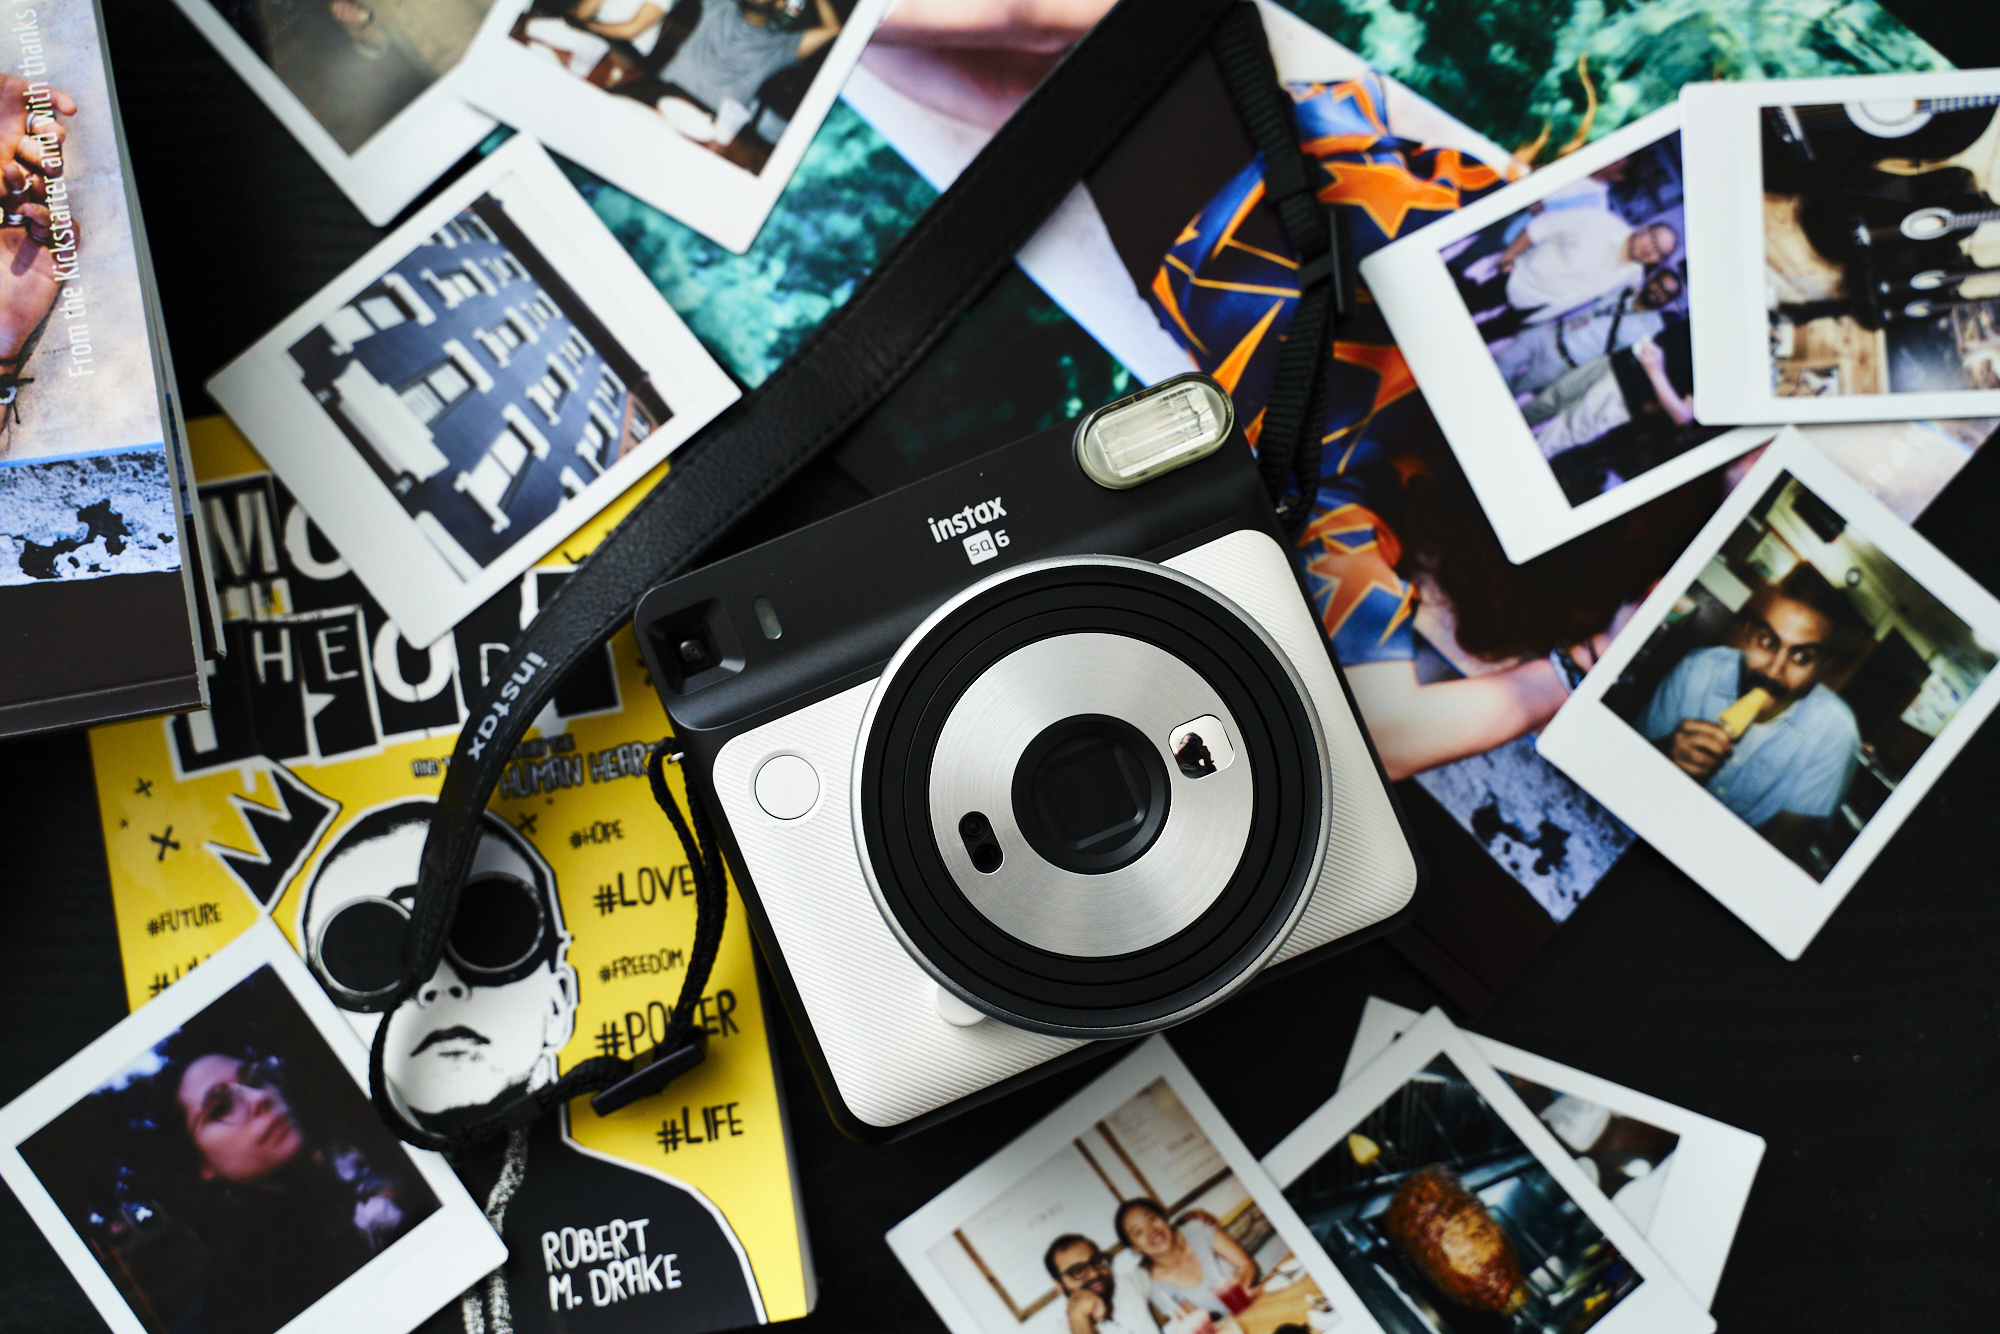 Fujifilm Instax Square SQ6 Tries to Recreate Instant Photography's